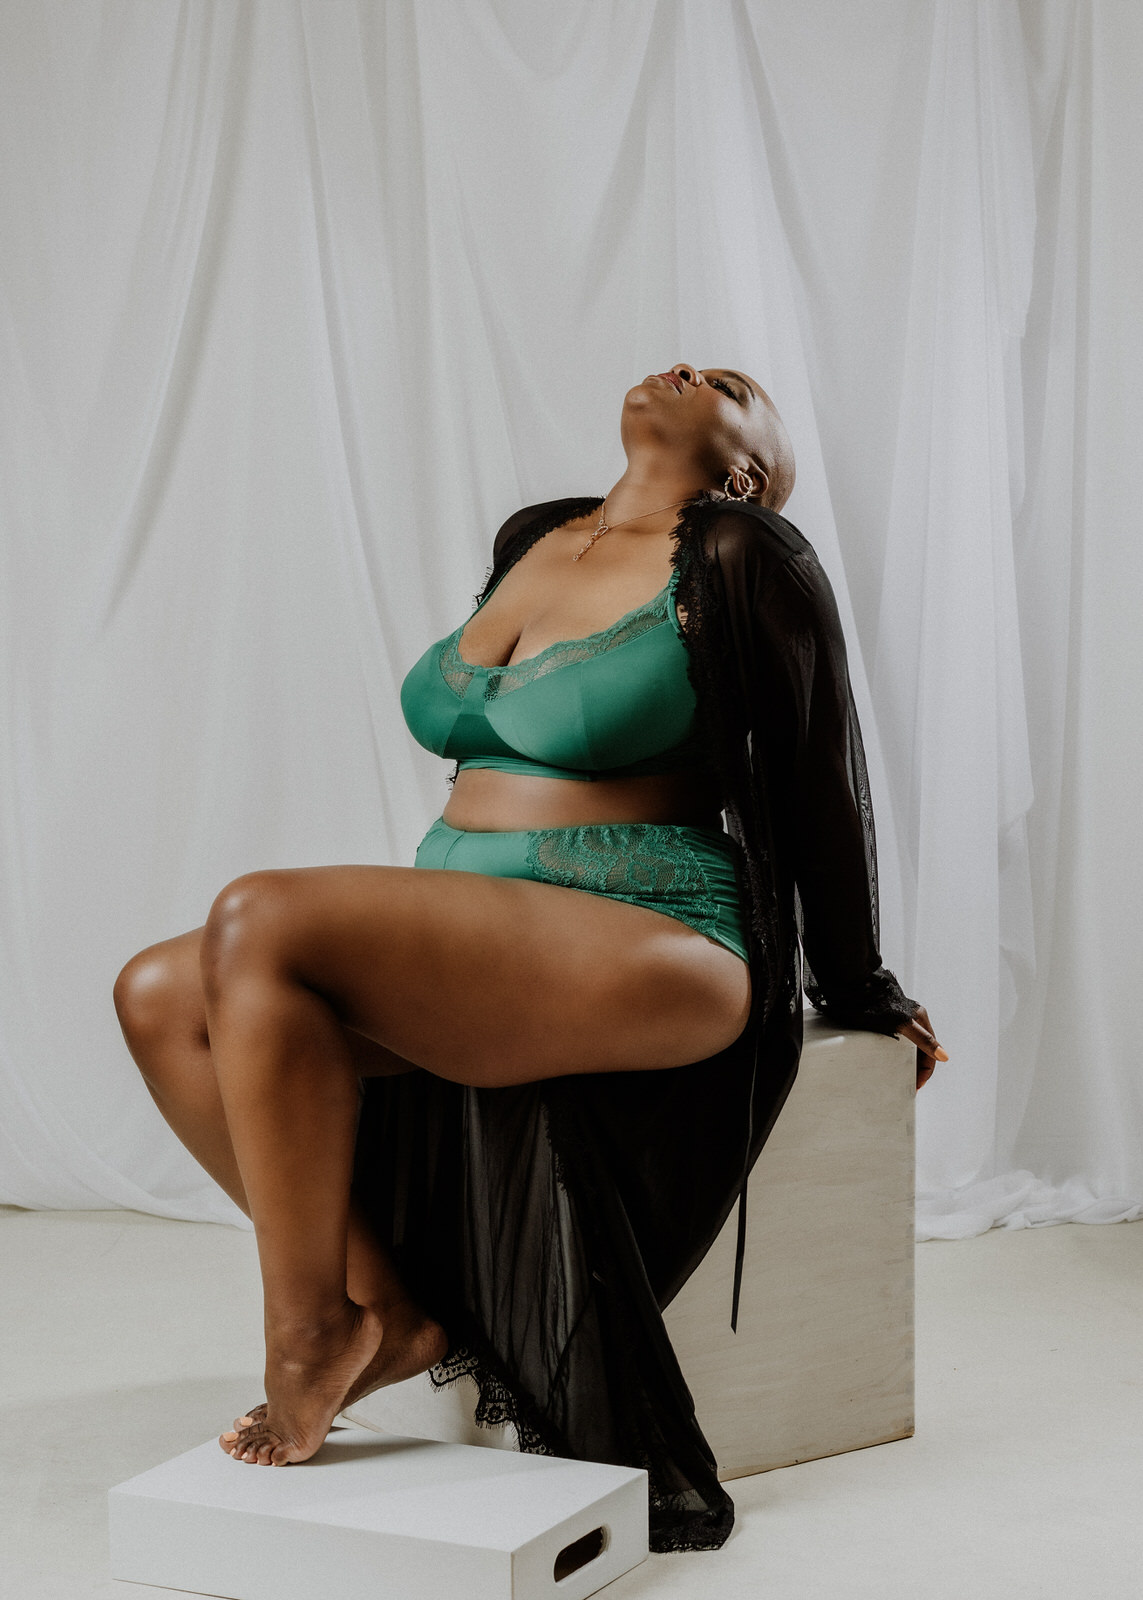 vancouver boudoir photographer image of plus size black woman with alopecia wearing lingerie and sitting on a block